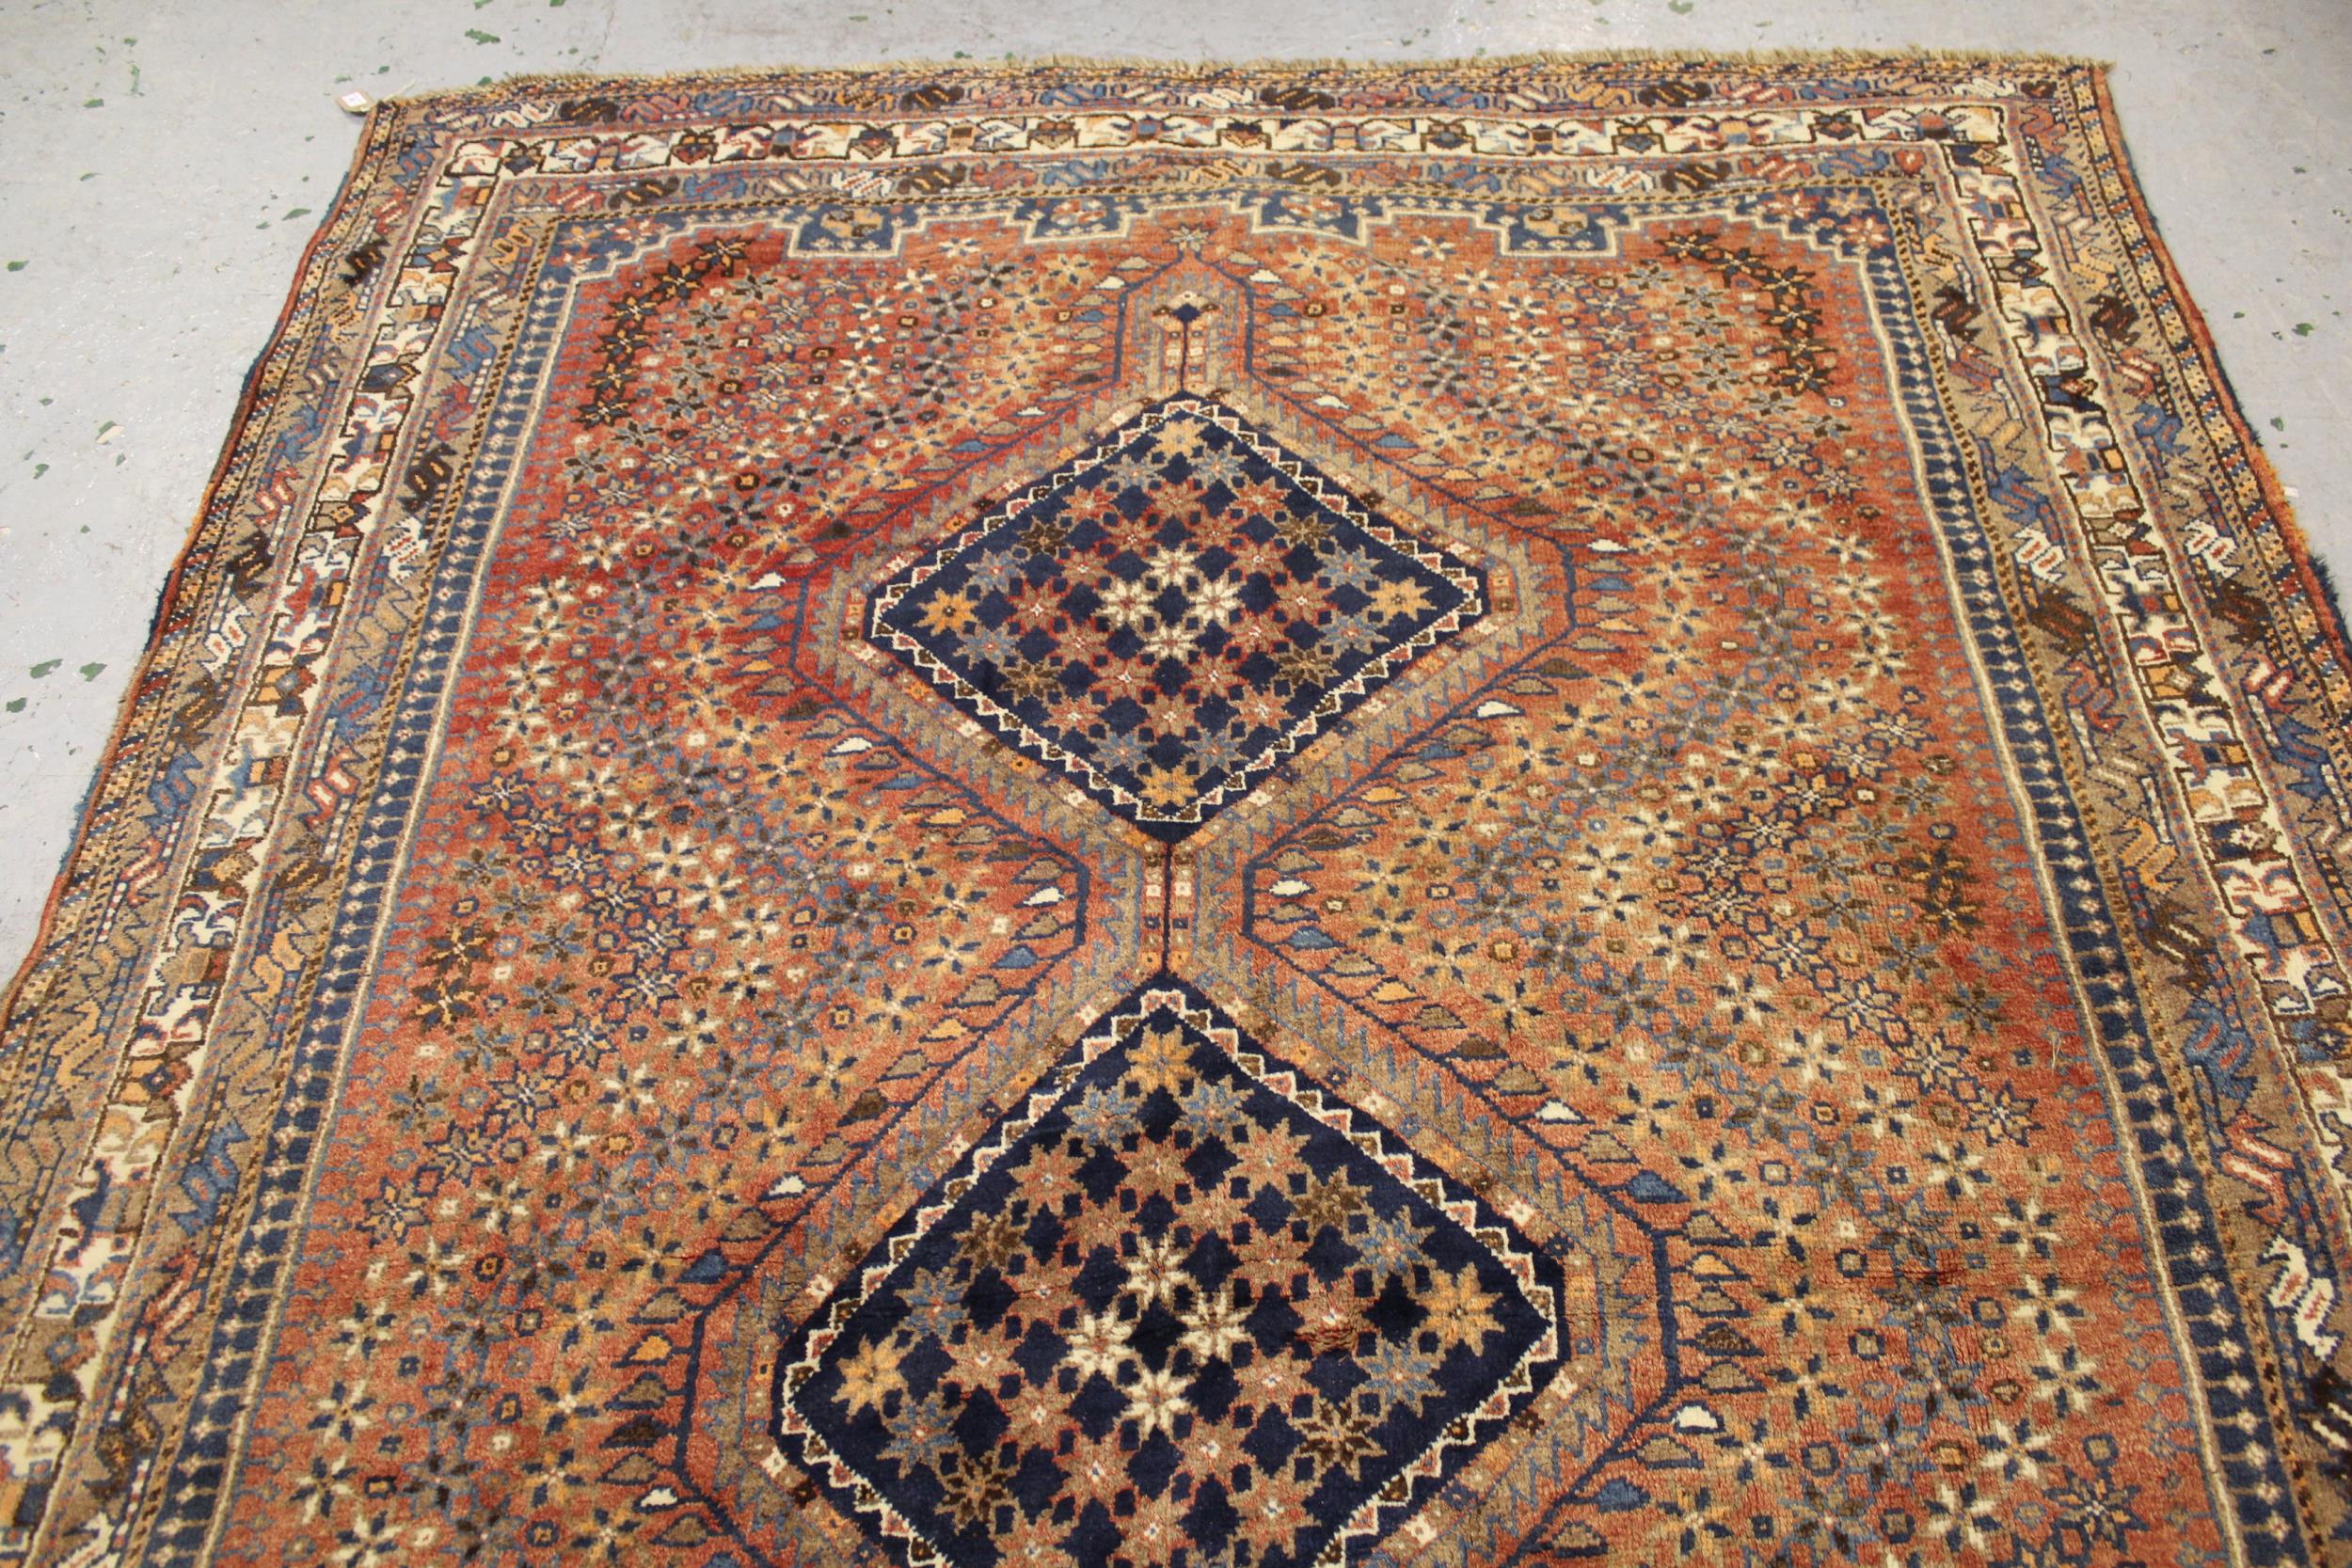 Small Shiraz carpet with a triple pole medallion design on a red ground with borders, 10ft - Image 3 of 4